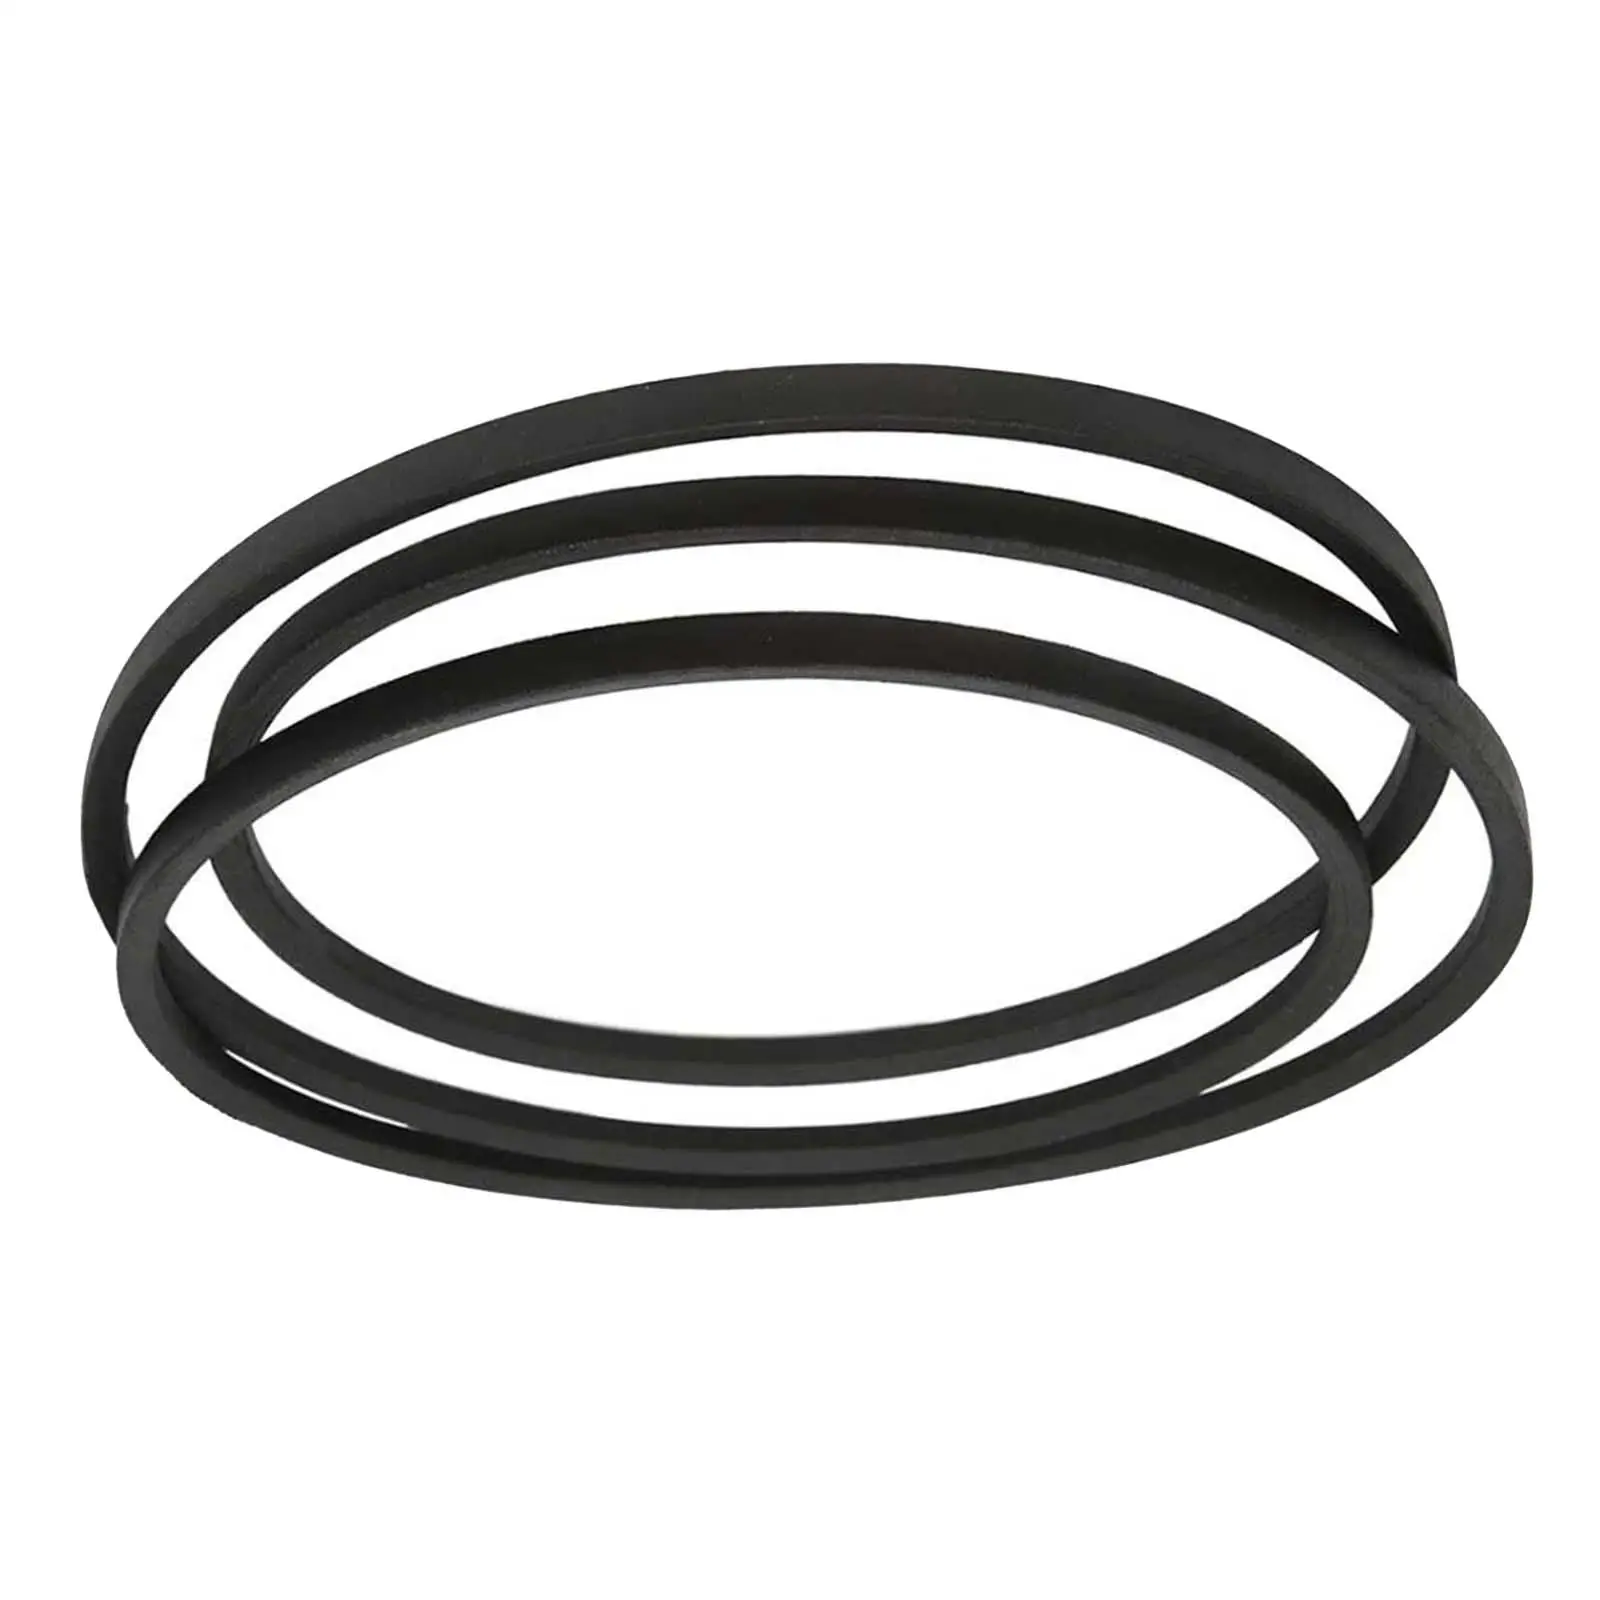 Replacement deck Belt 532197253 197253 429636 Durable for Poulan 1/2